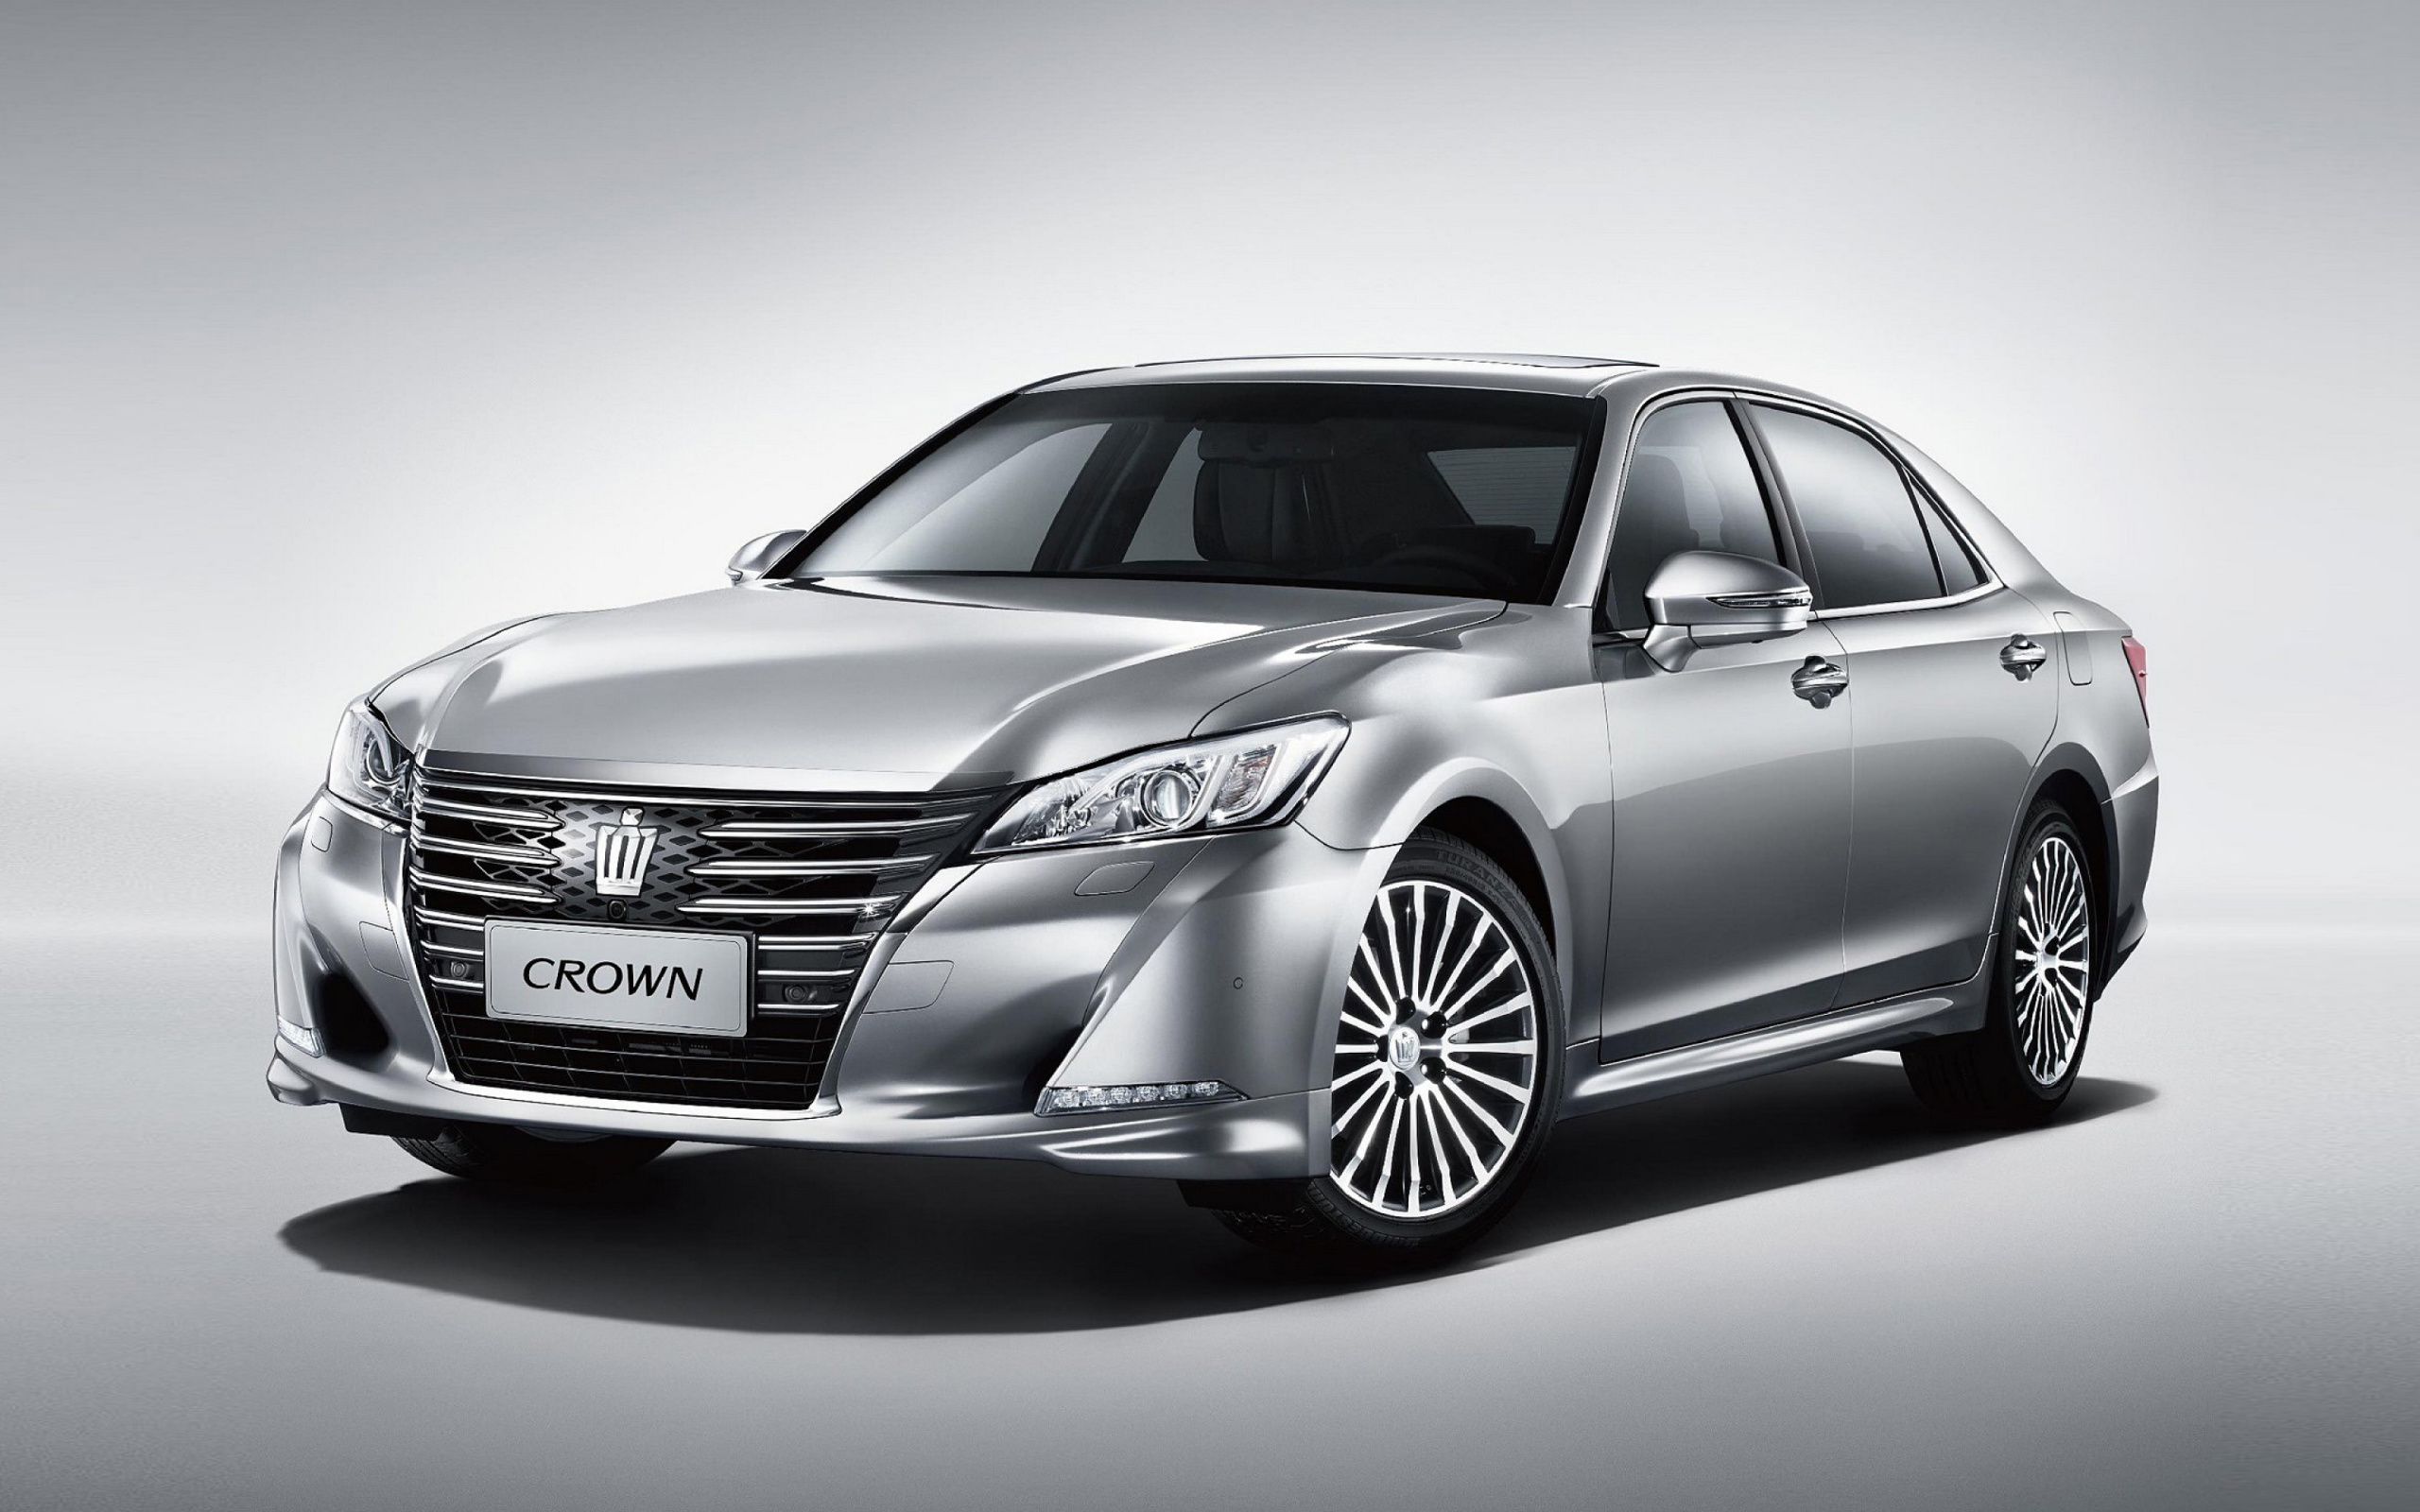  Is The Toyota Crown A Hatchback